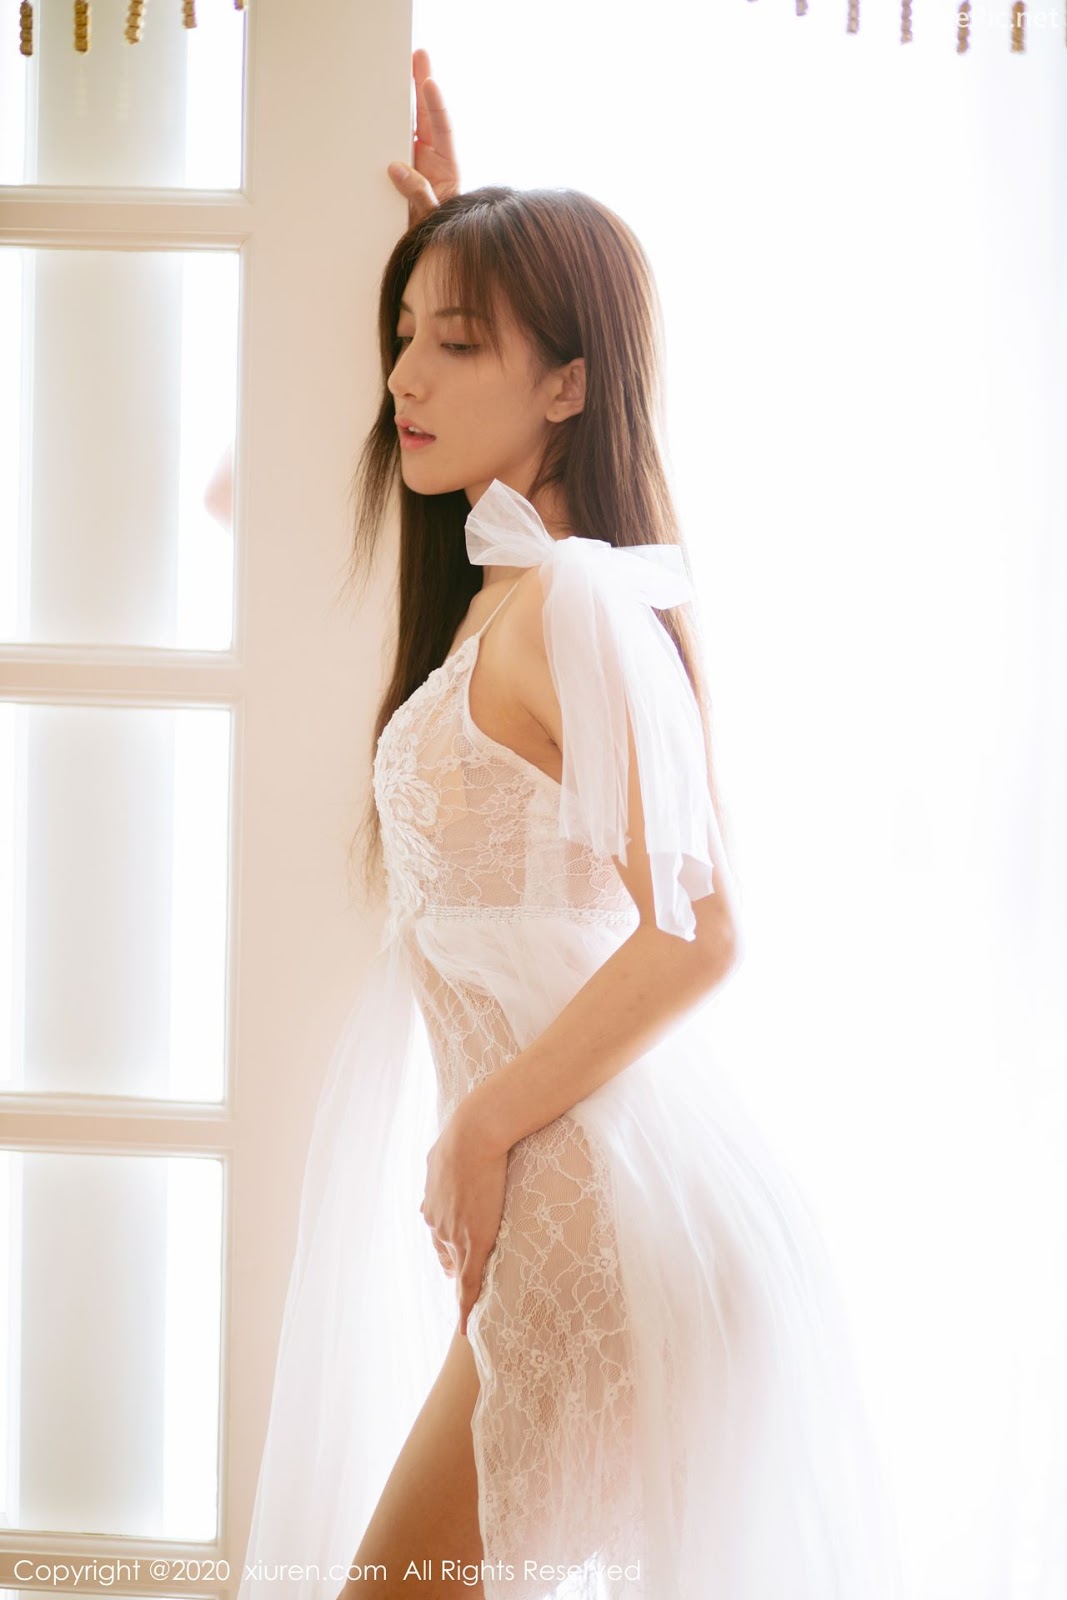 XIUREN No.1914 - Chinese model 林文文Yooki so Sexy with Transparent White Lace Dress - Picture 55